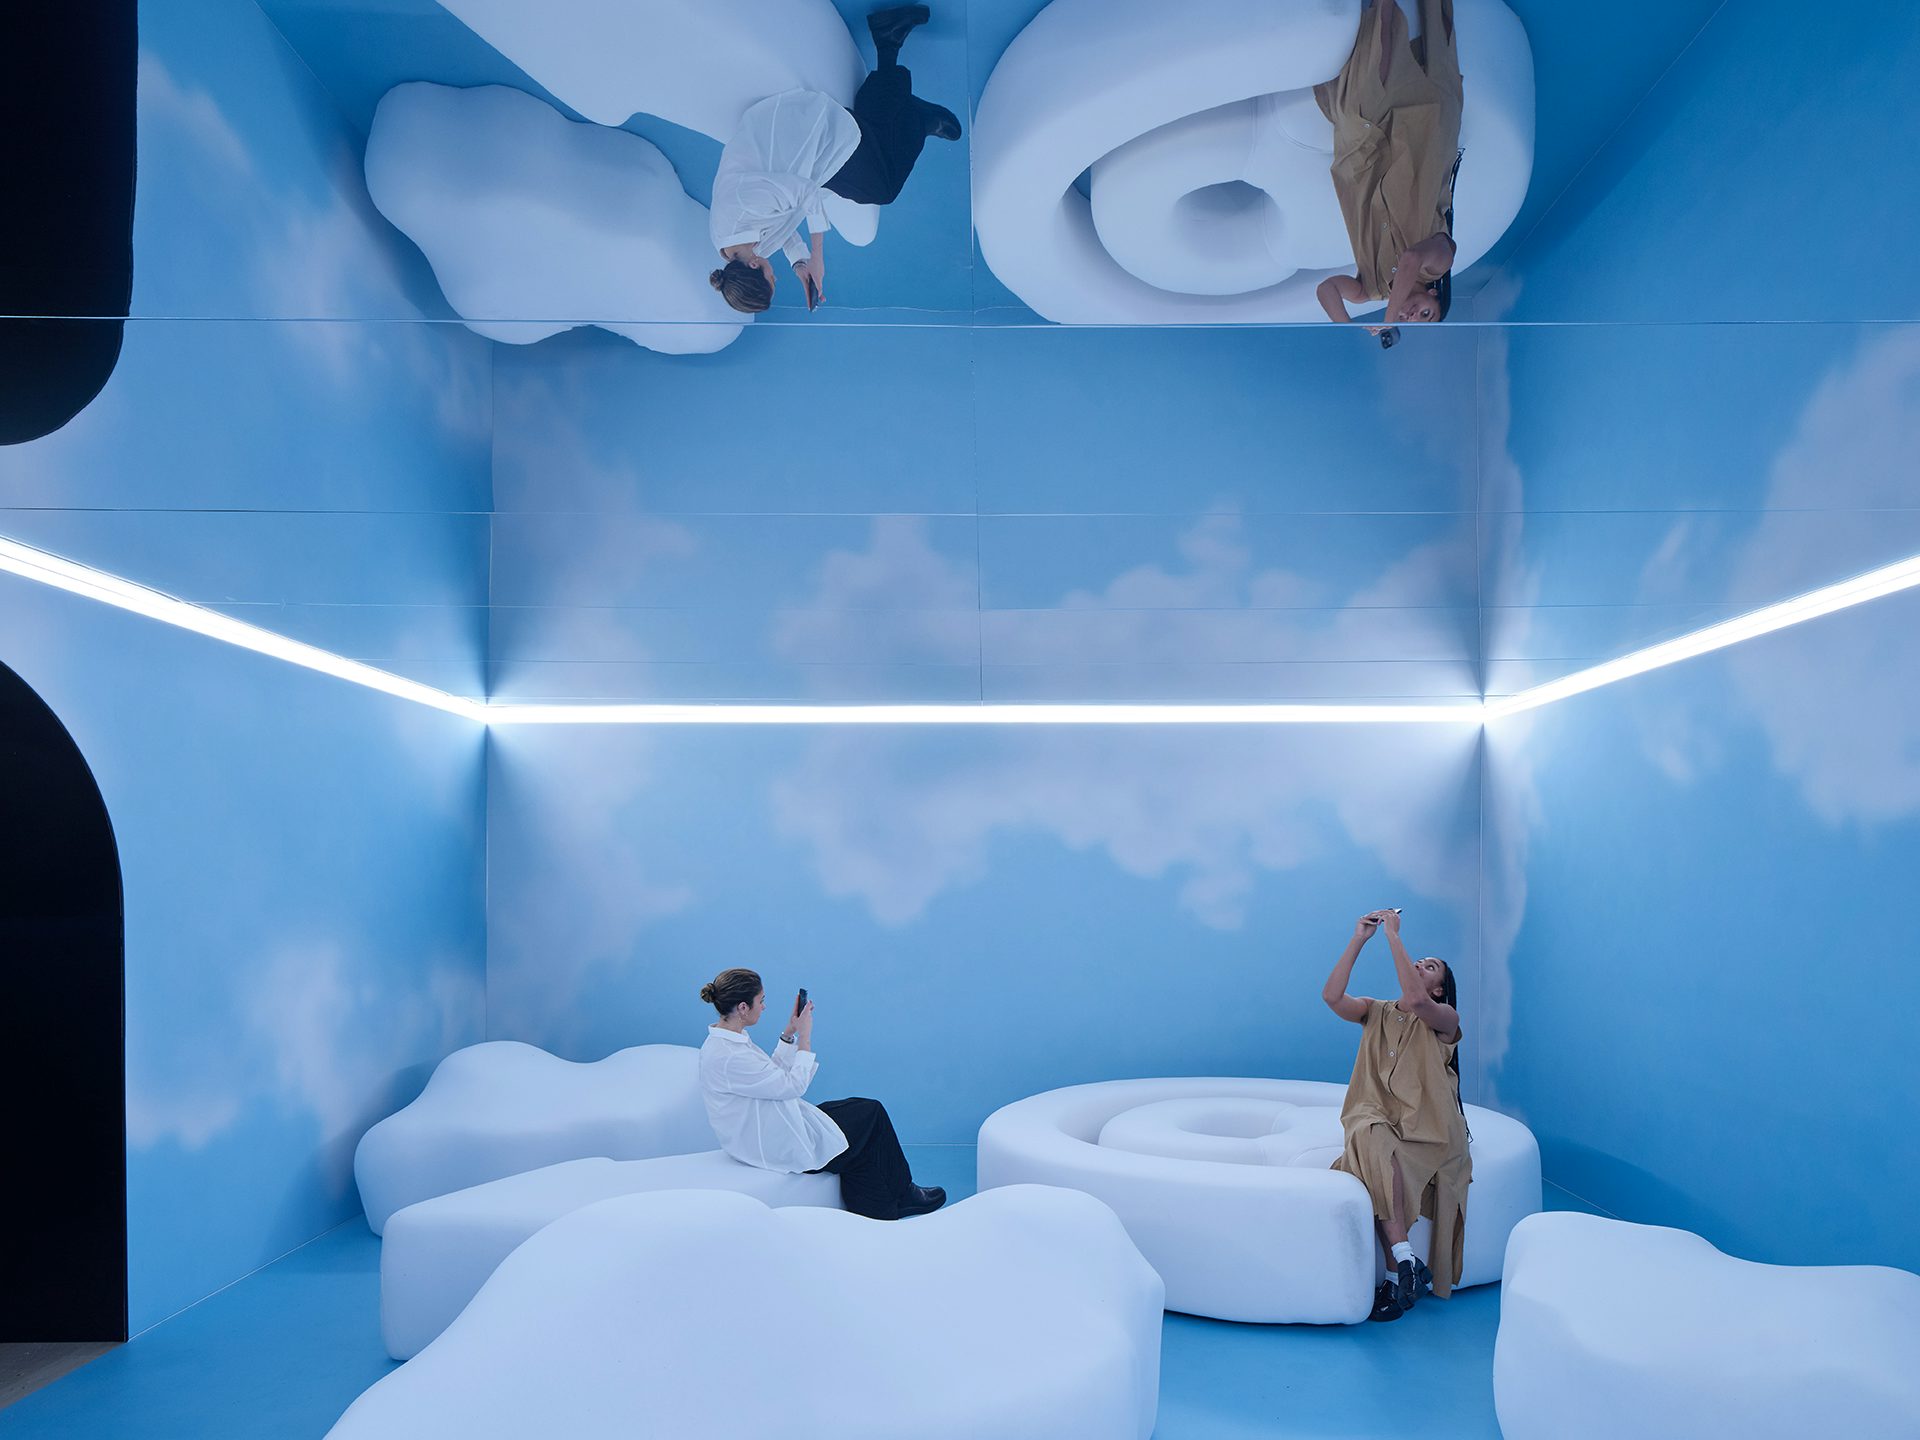 Photo shows two people taking photos in a room at Mailchimp's Email is Dead exhibition at the Design Museum, featuring large white pillowy seating, blue walls decorated with clouds, and a mirrored ceiling